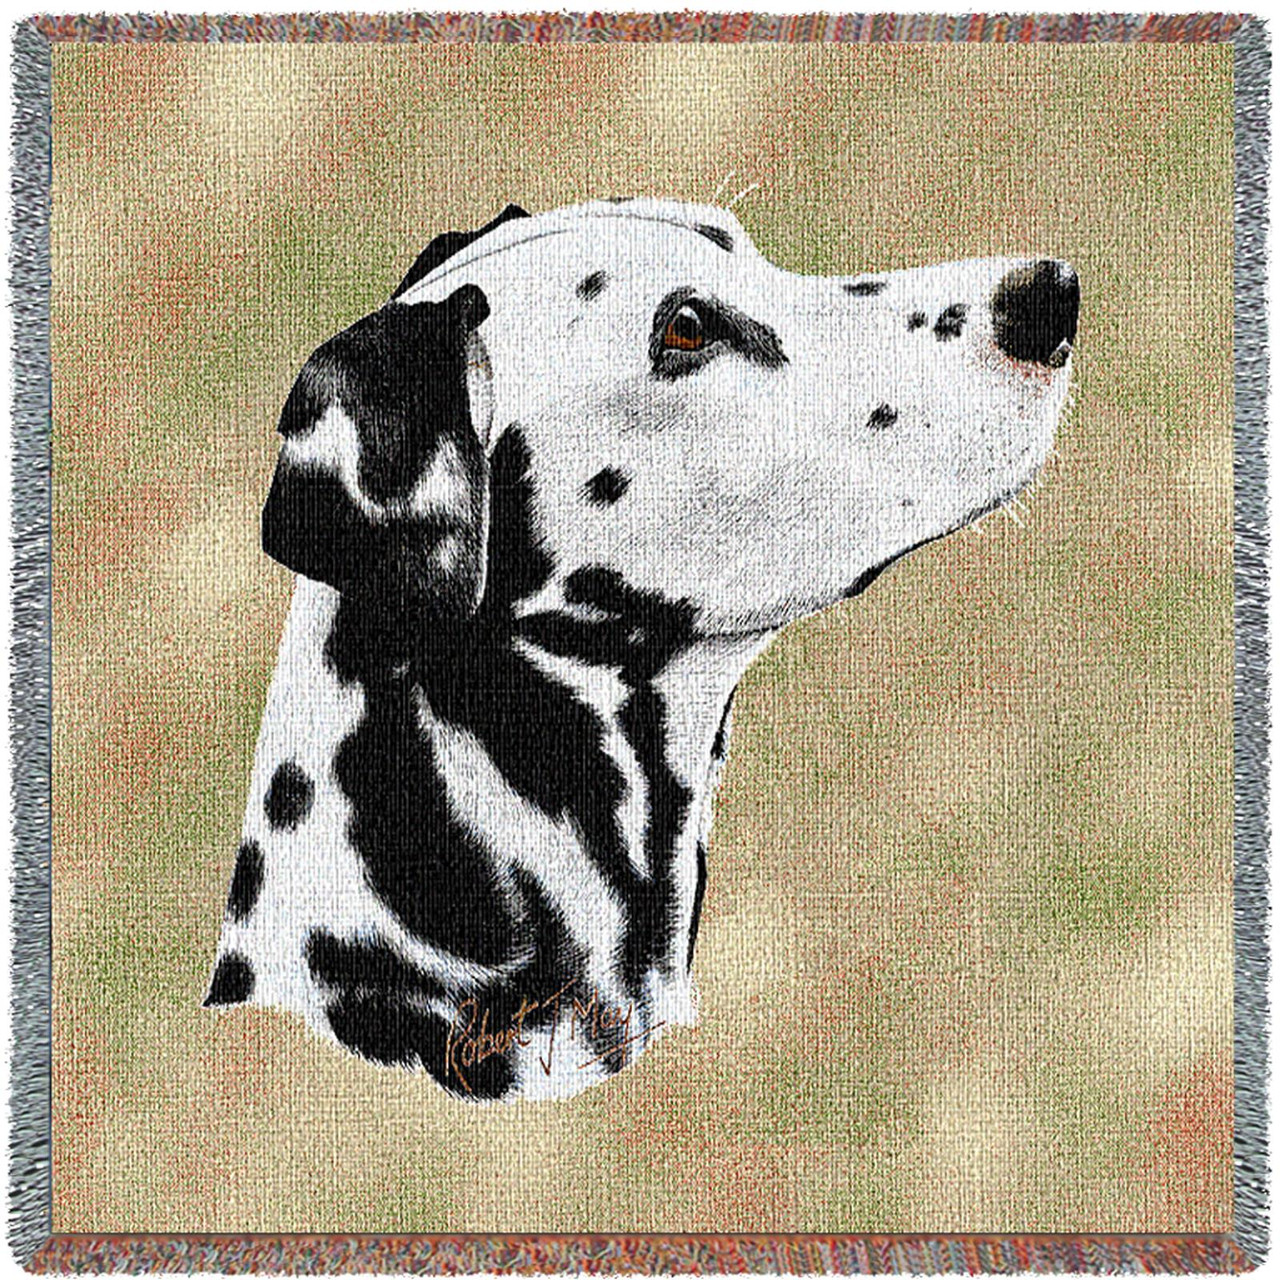 Dalmatian Robert May - Lap Square Cotton Woven Blanket - Made in the USA (54x54)